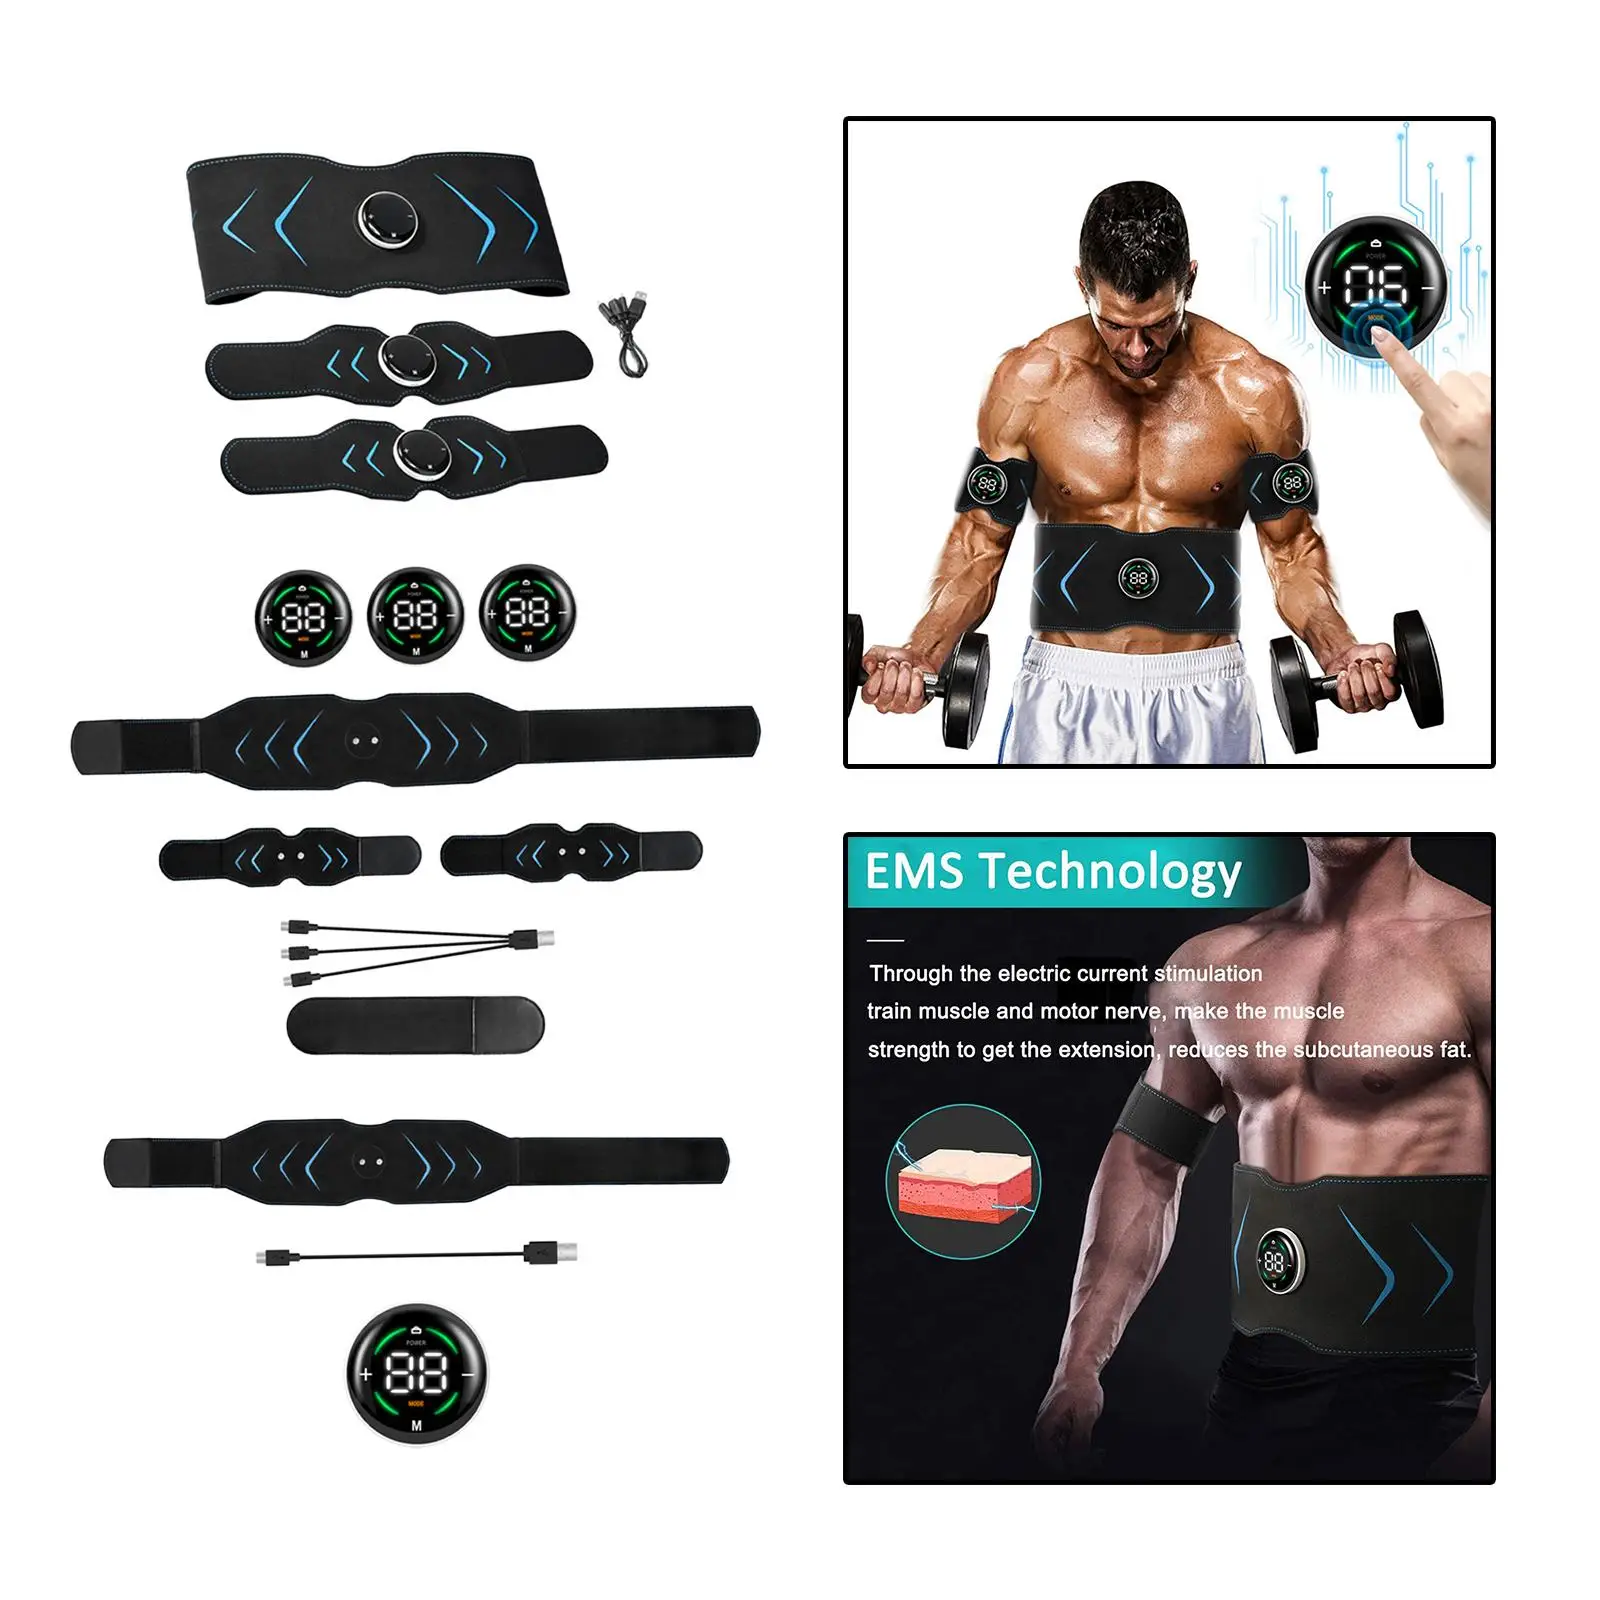 Portable Abs Stimulator Belt LCD Screen Display Training Abdominal Muscle Toner Abdomen USB for Fitness Home Gym Workout